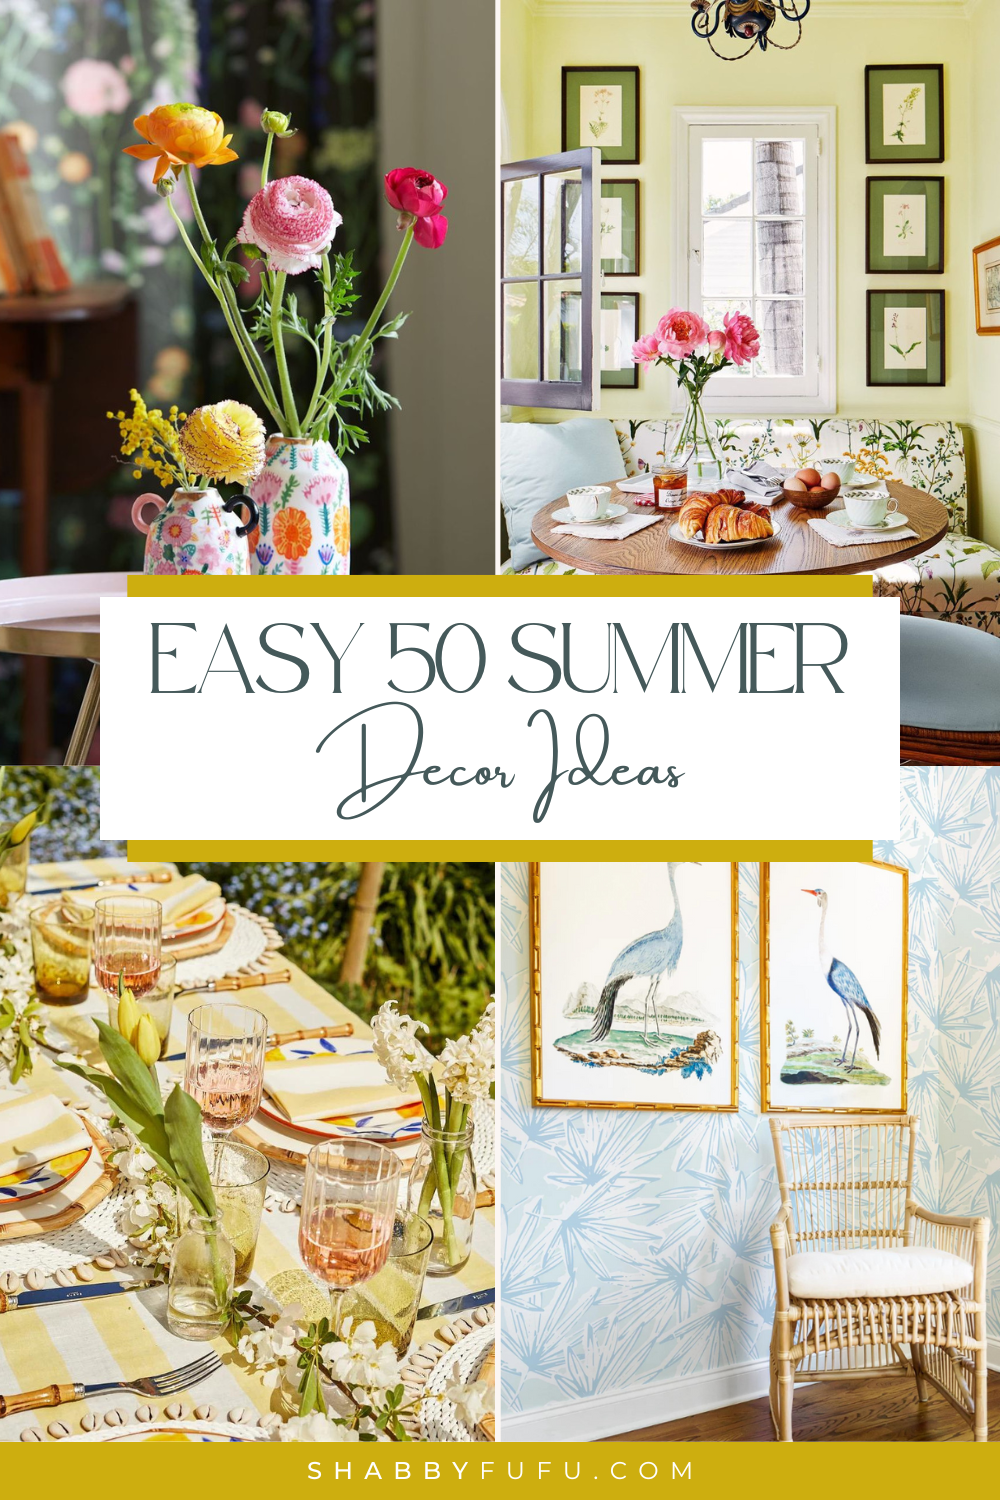 Decorative Pinterest image featuring a collage of different summer decor ideas